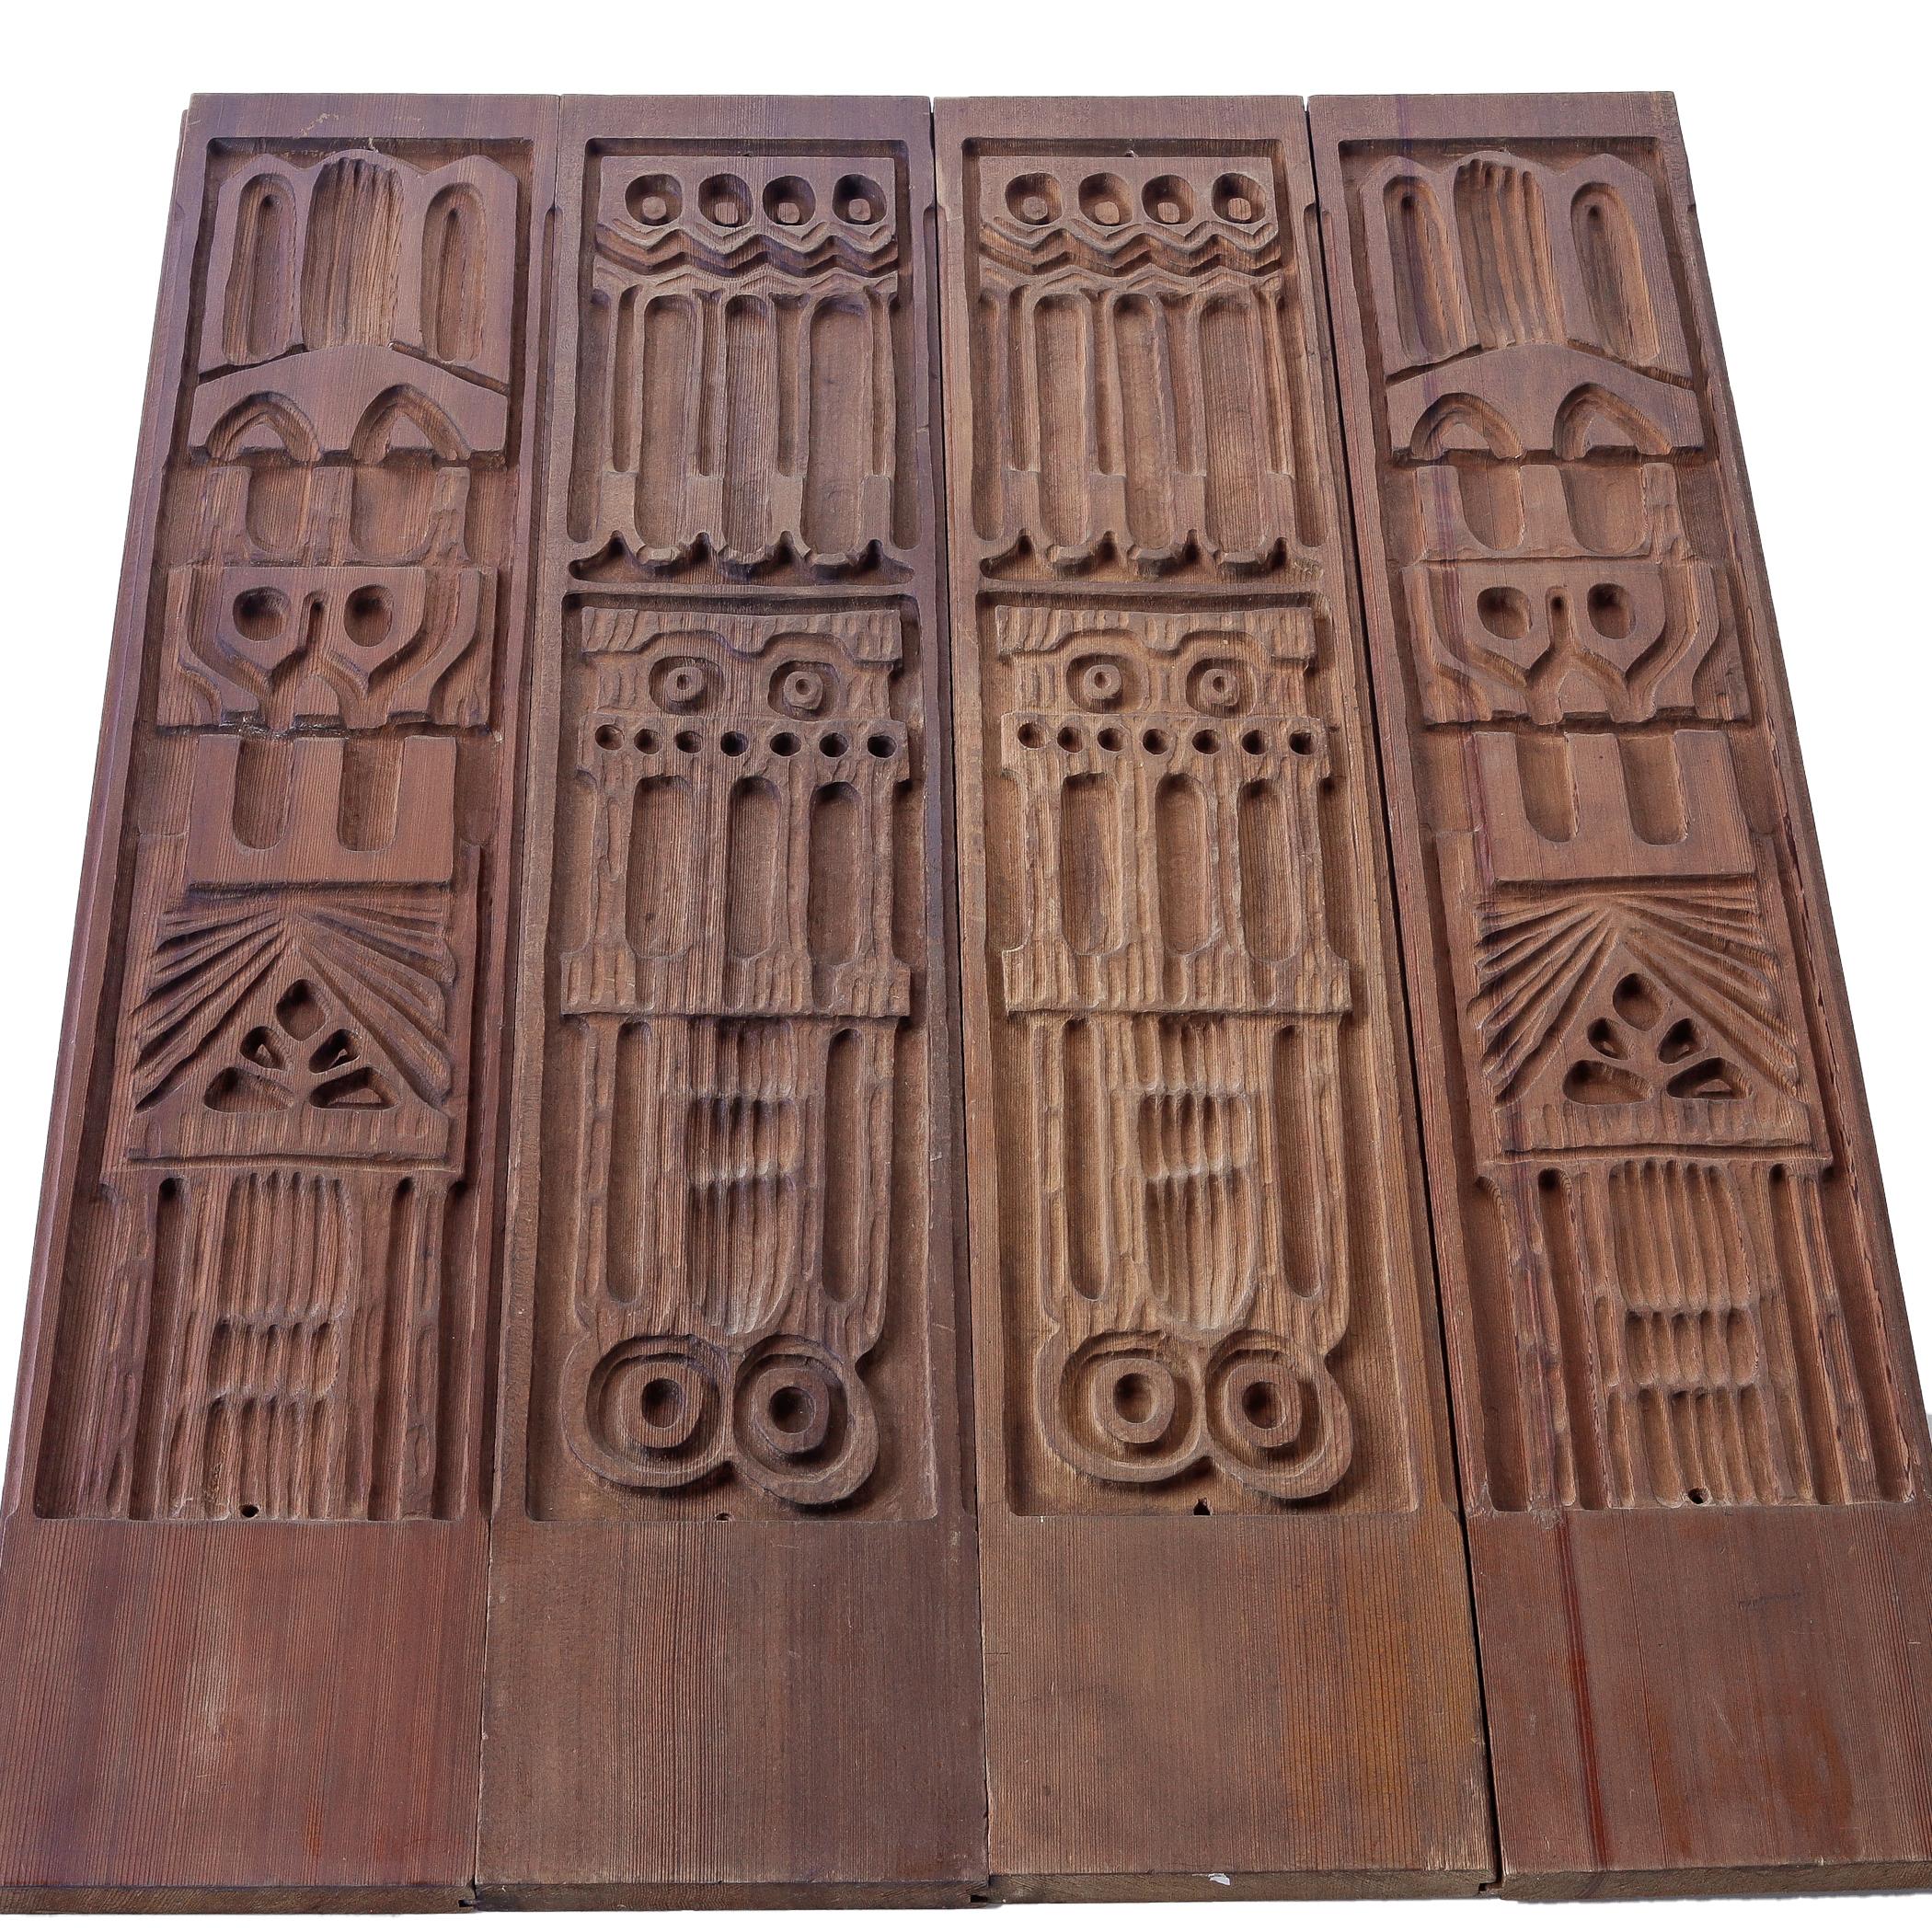 Set of four bas relief carved redwood wall panels by Panelcarve, designed by Evelyn Ackerman, circa 1967. The set consists of two pairs, with two different patterns. Each piece has a tongue and groove joint carved along each long side so that they